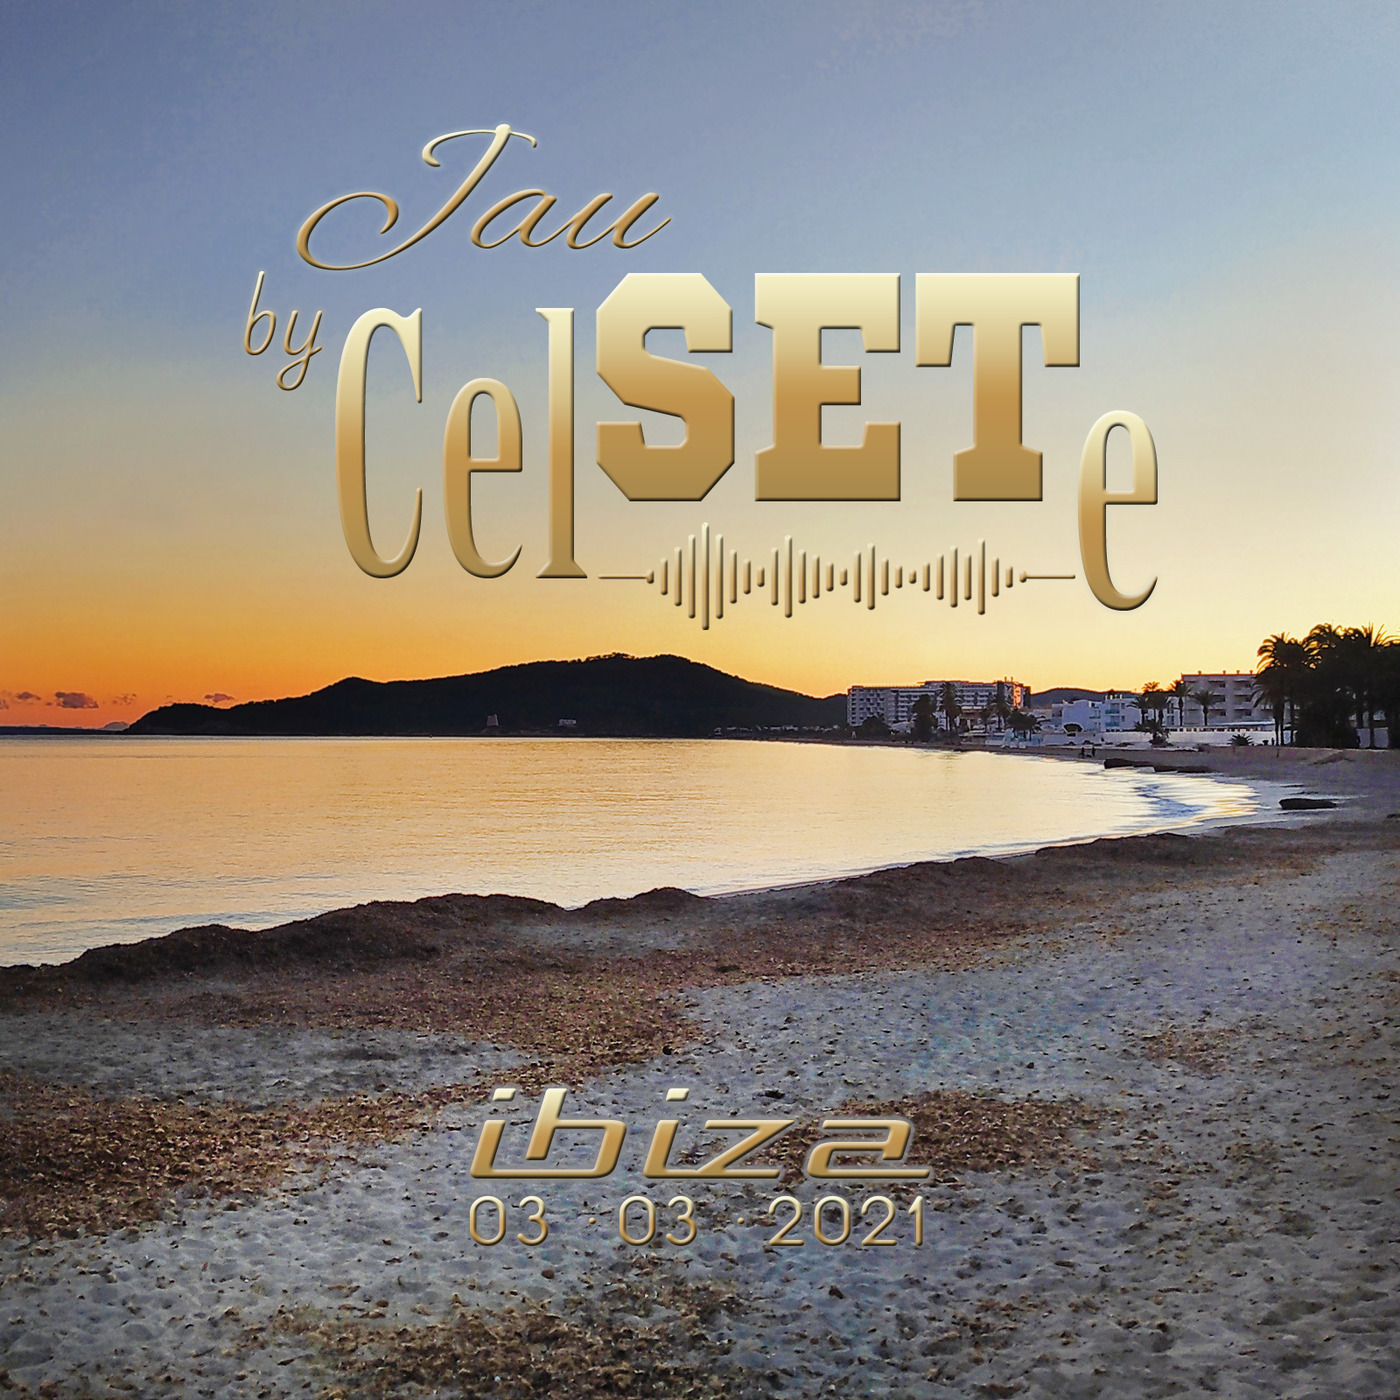 Celso Diaz - Set House Ibiza 03-03-2021 | JauSETe by CELSETE